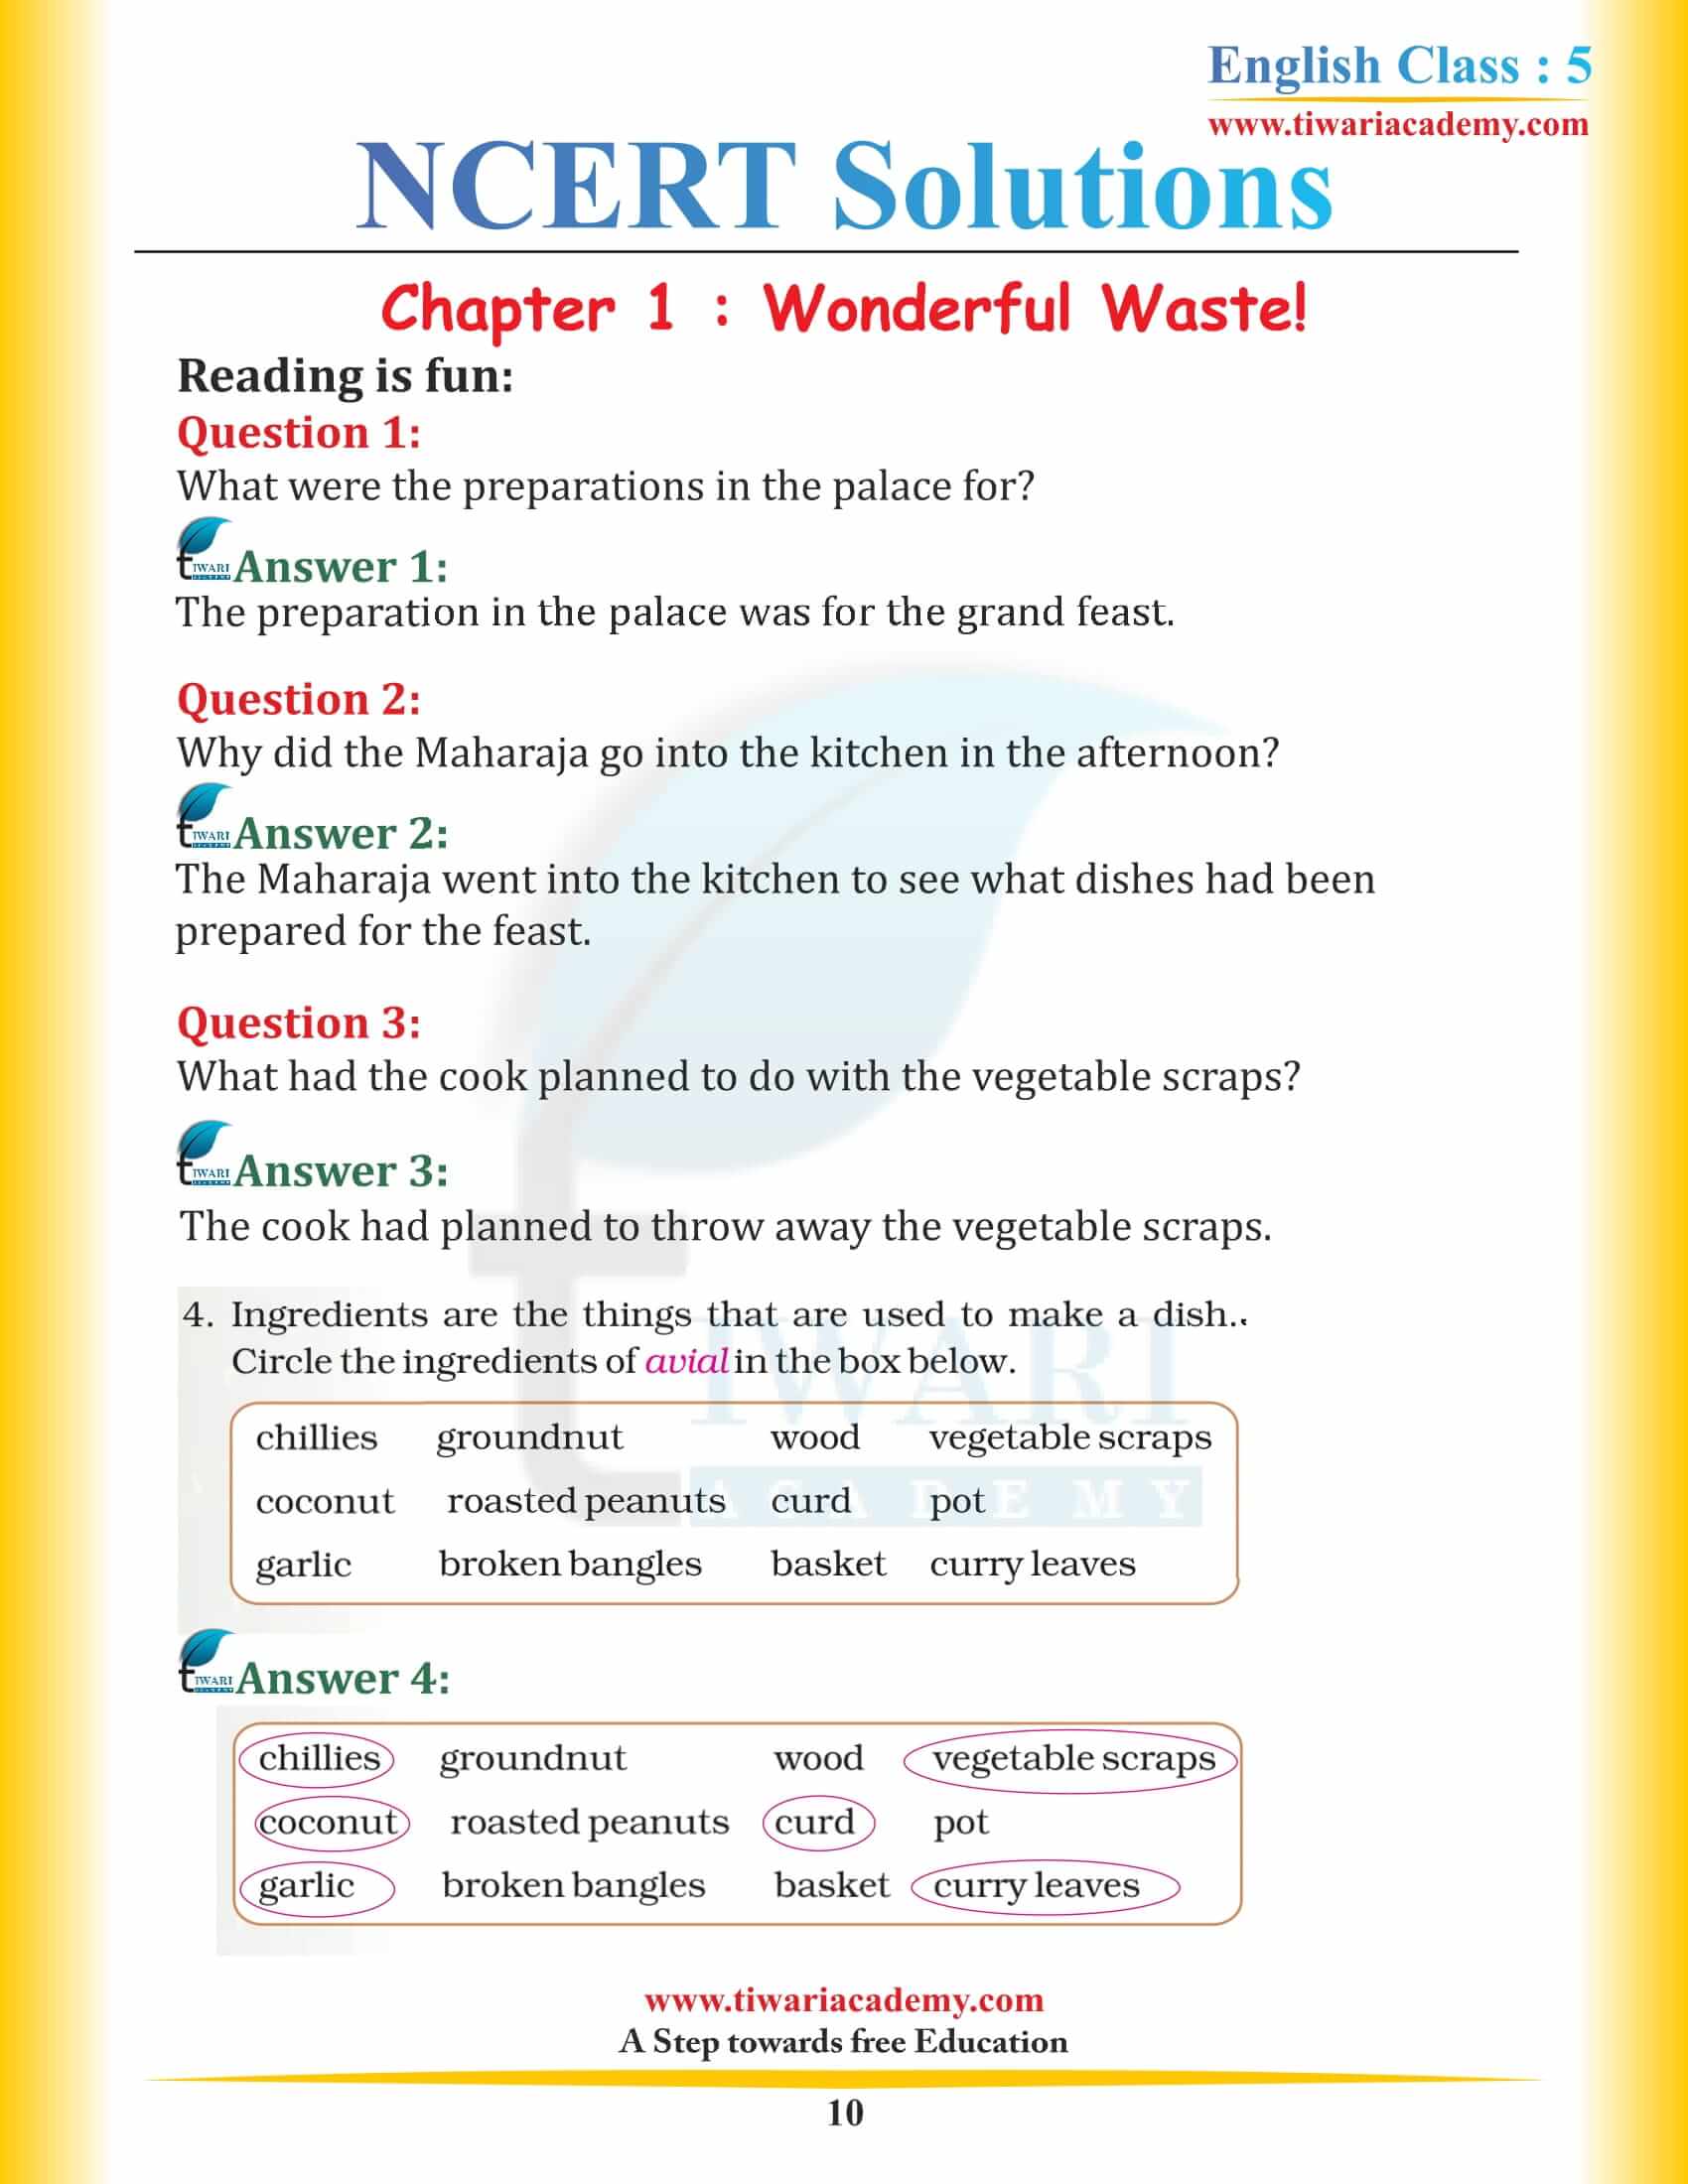 NCERT Solutions for Class 5 English Chapter 1 Wonderful Waste